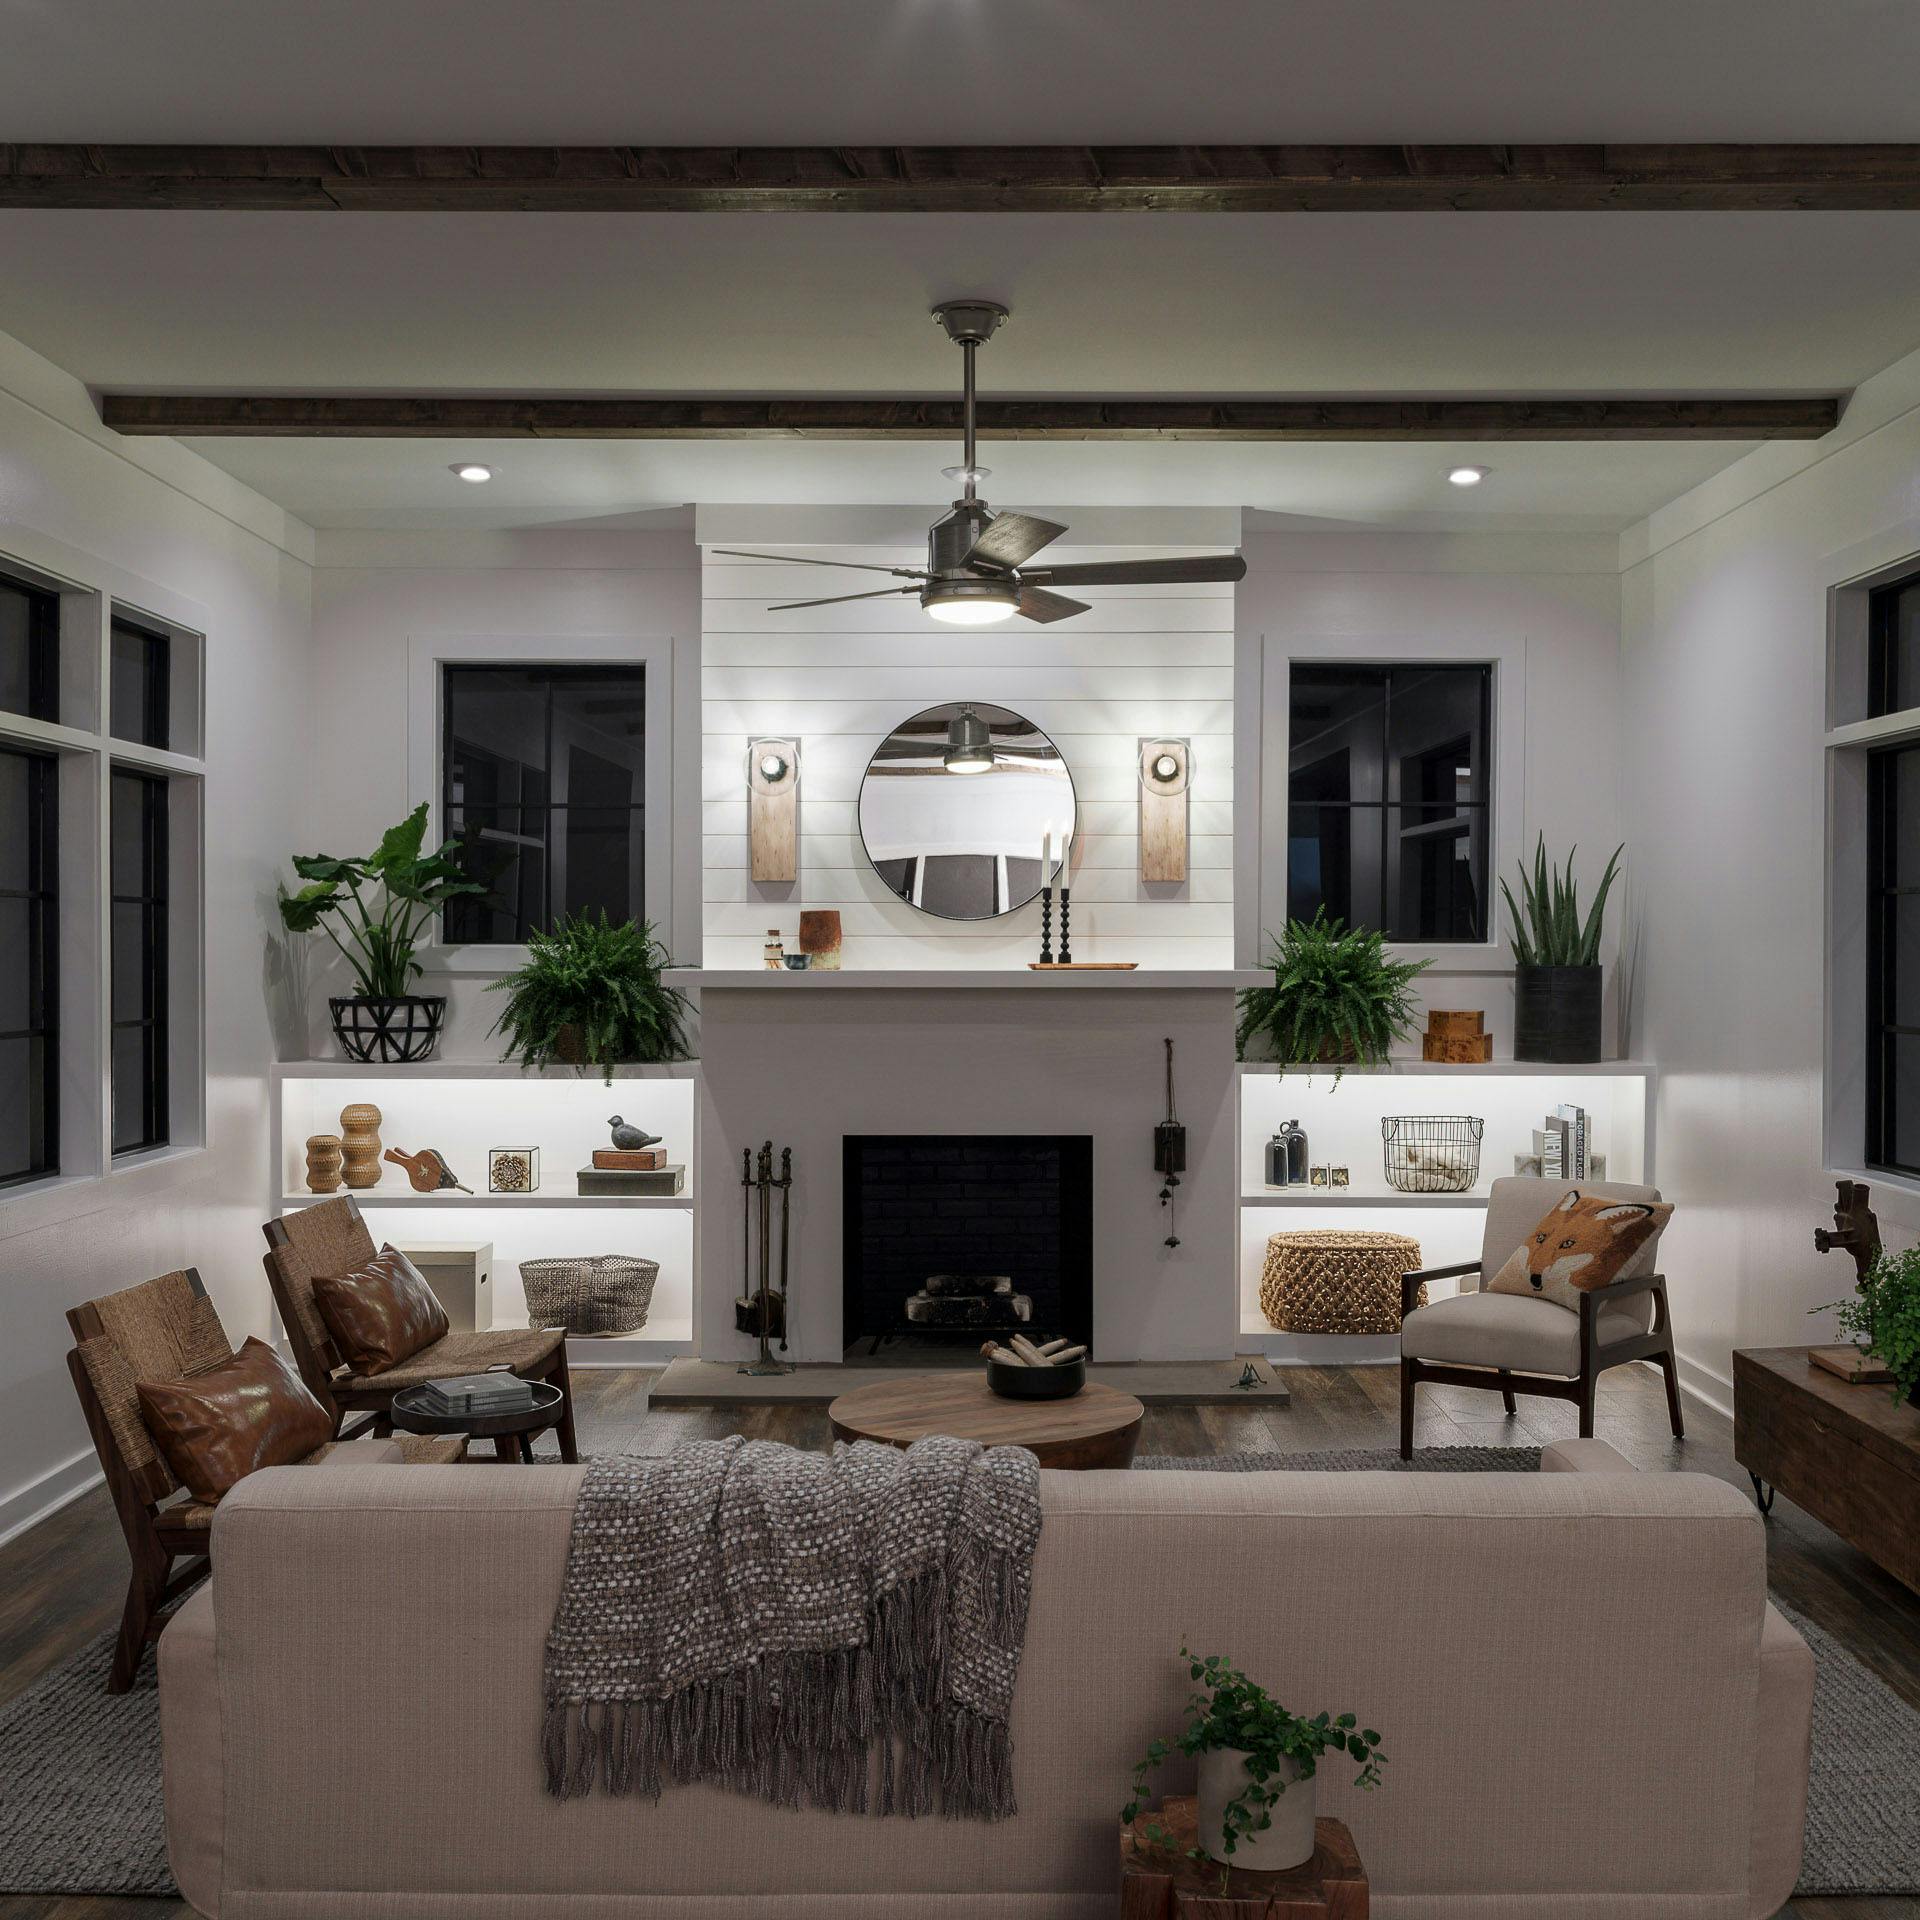 Night time Modern Farmhouse living room with all lights turned on